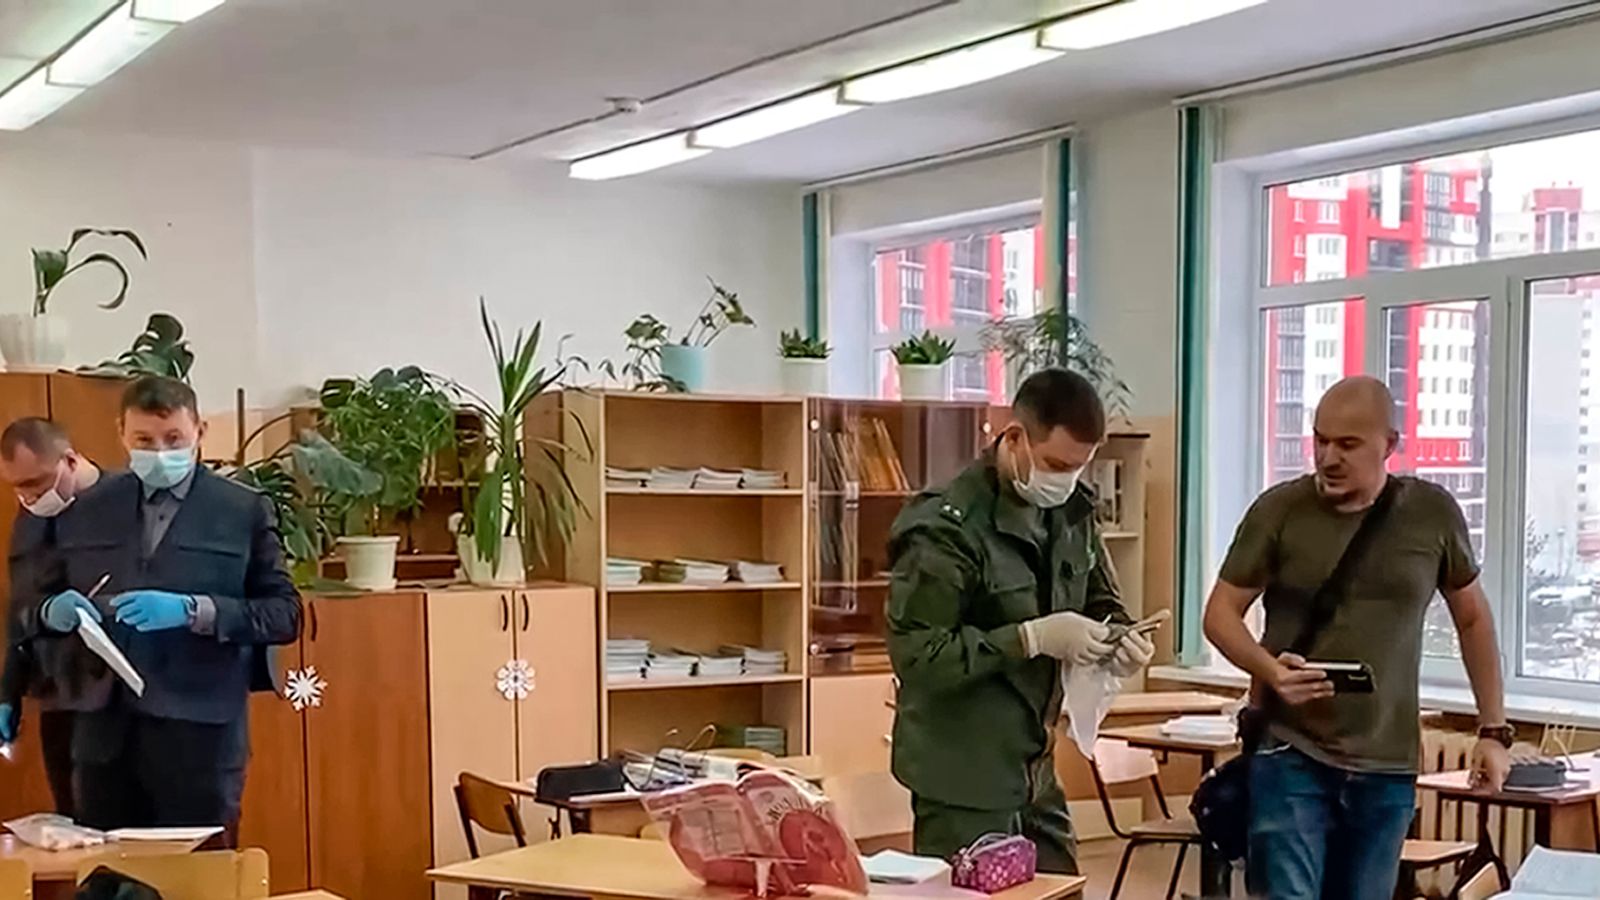 Russia school shooting: 14-year-old girl kills classmate and injures five